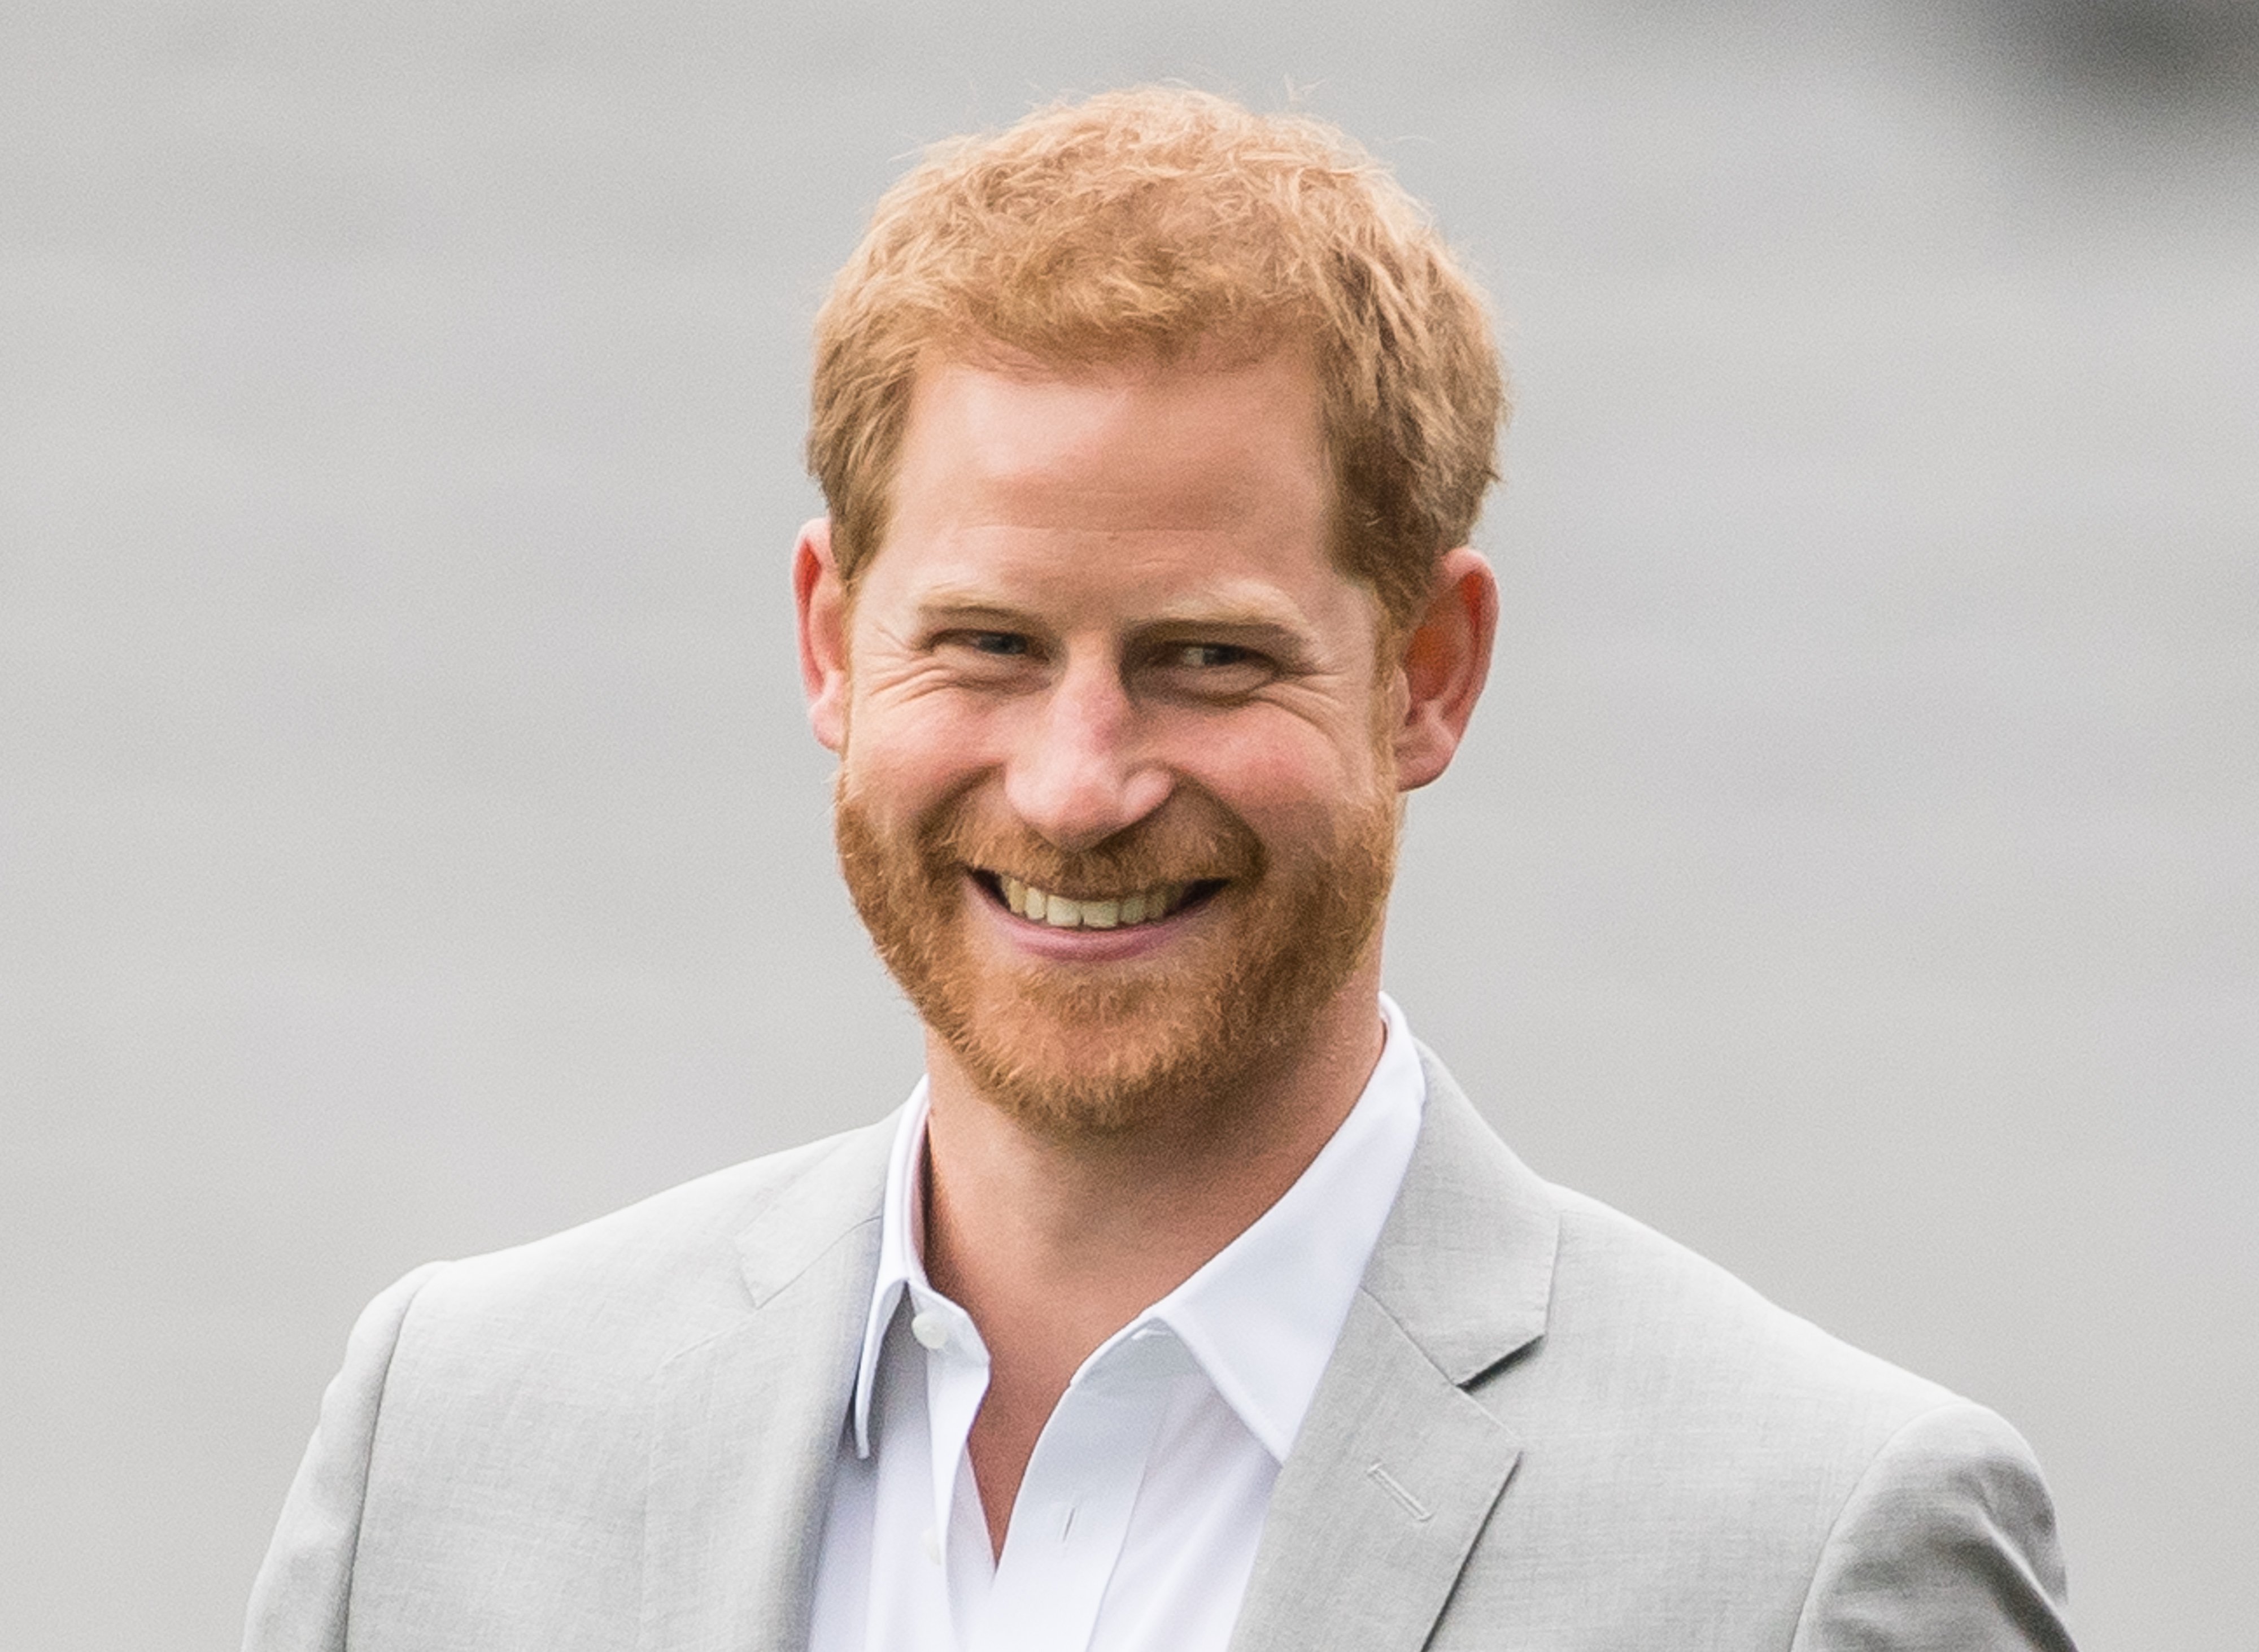 Prince Harry, Duke of Sussex visits Croke Park, home of Ireland's largest sporting organisation, the Gaelic Athletic Association on July 11, 2018 in Dublin, Ireland | Source: Getty Images